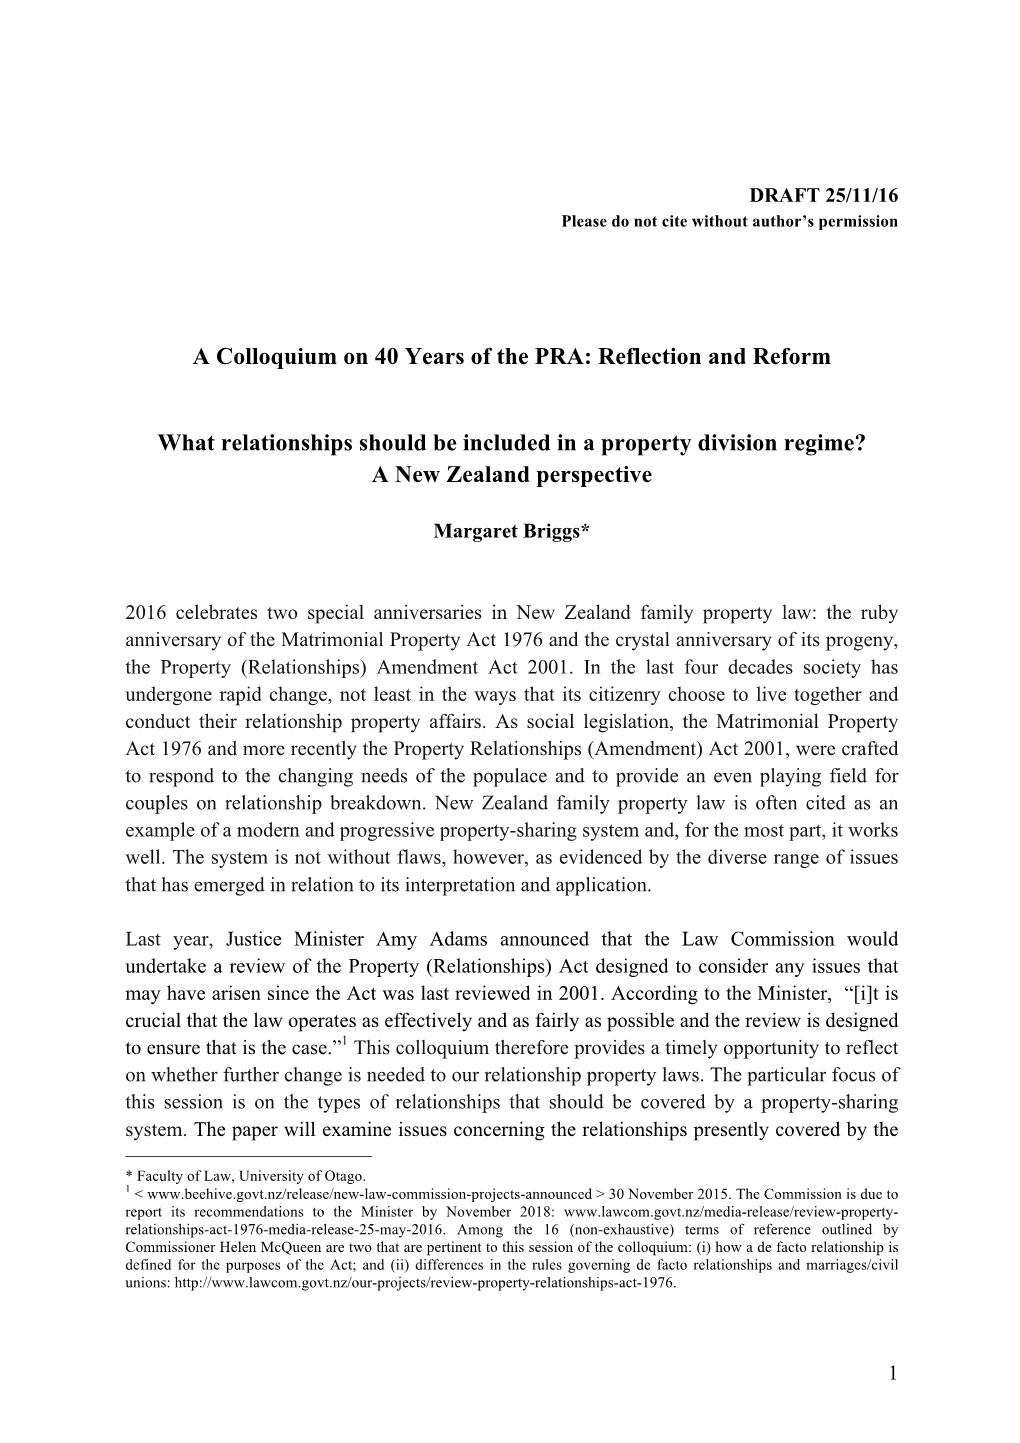 A Colloquium on 40 Years of the PRA: Reflection and Reform What Relationships Should Be Included in a Property Division Regime?